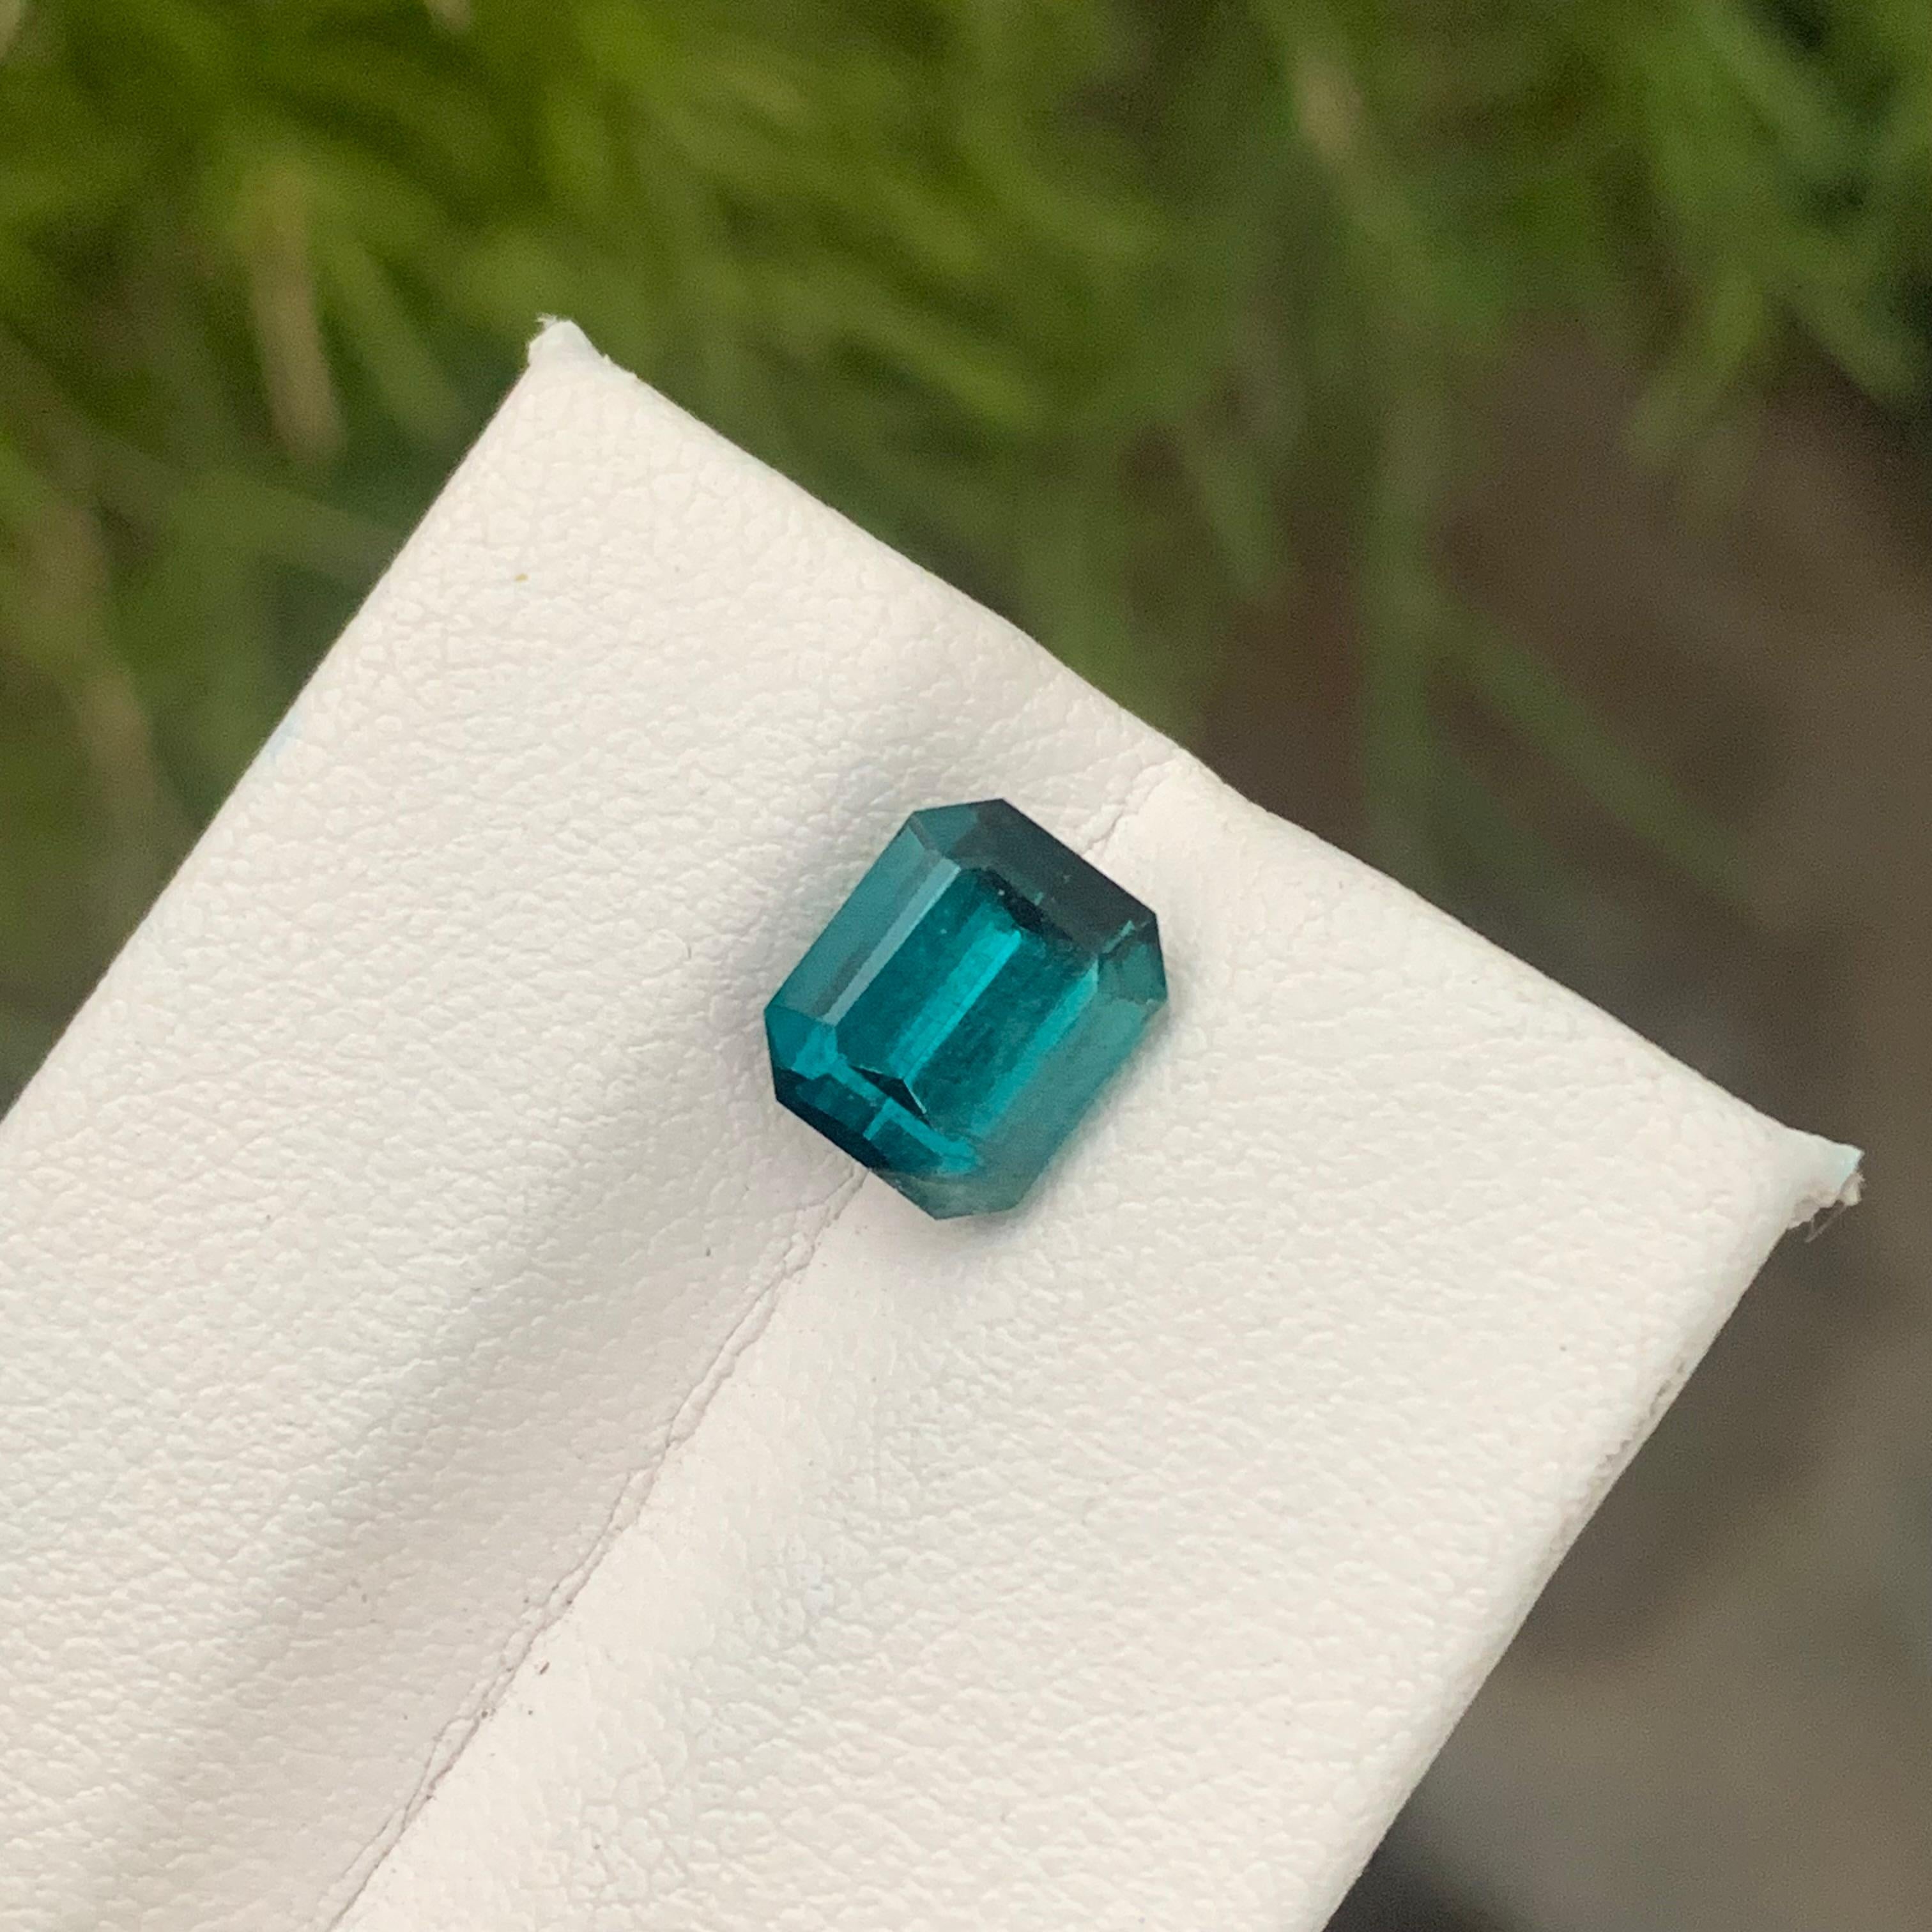 2.75 Carat Included Natural Loose Indicolite Tourmaline Emerald Cut Ring Gem For Sale 3